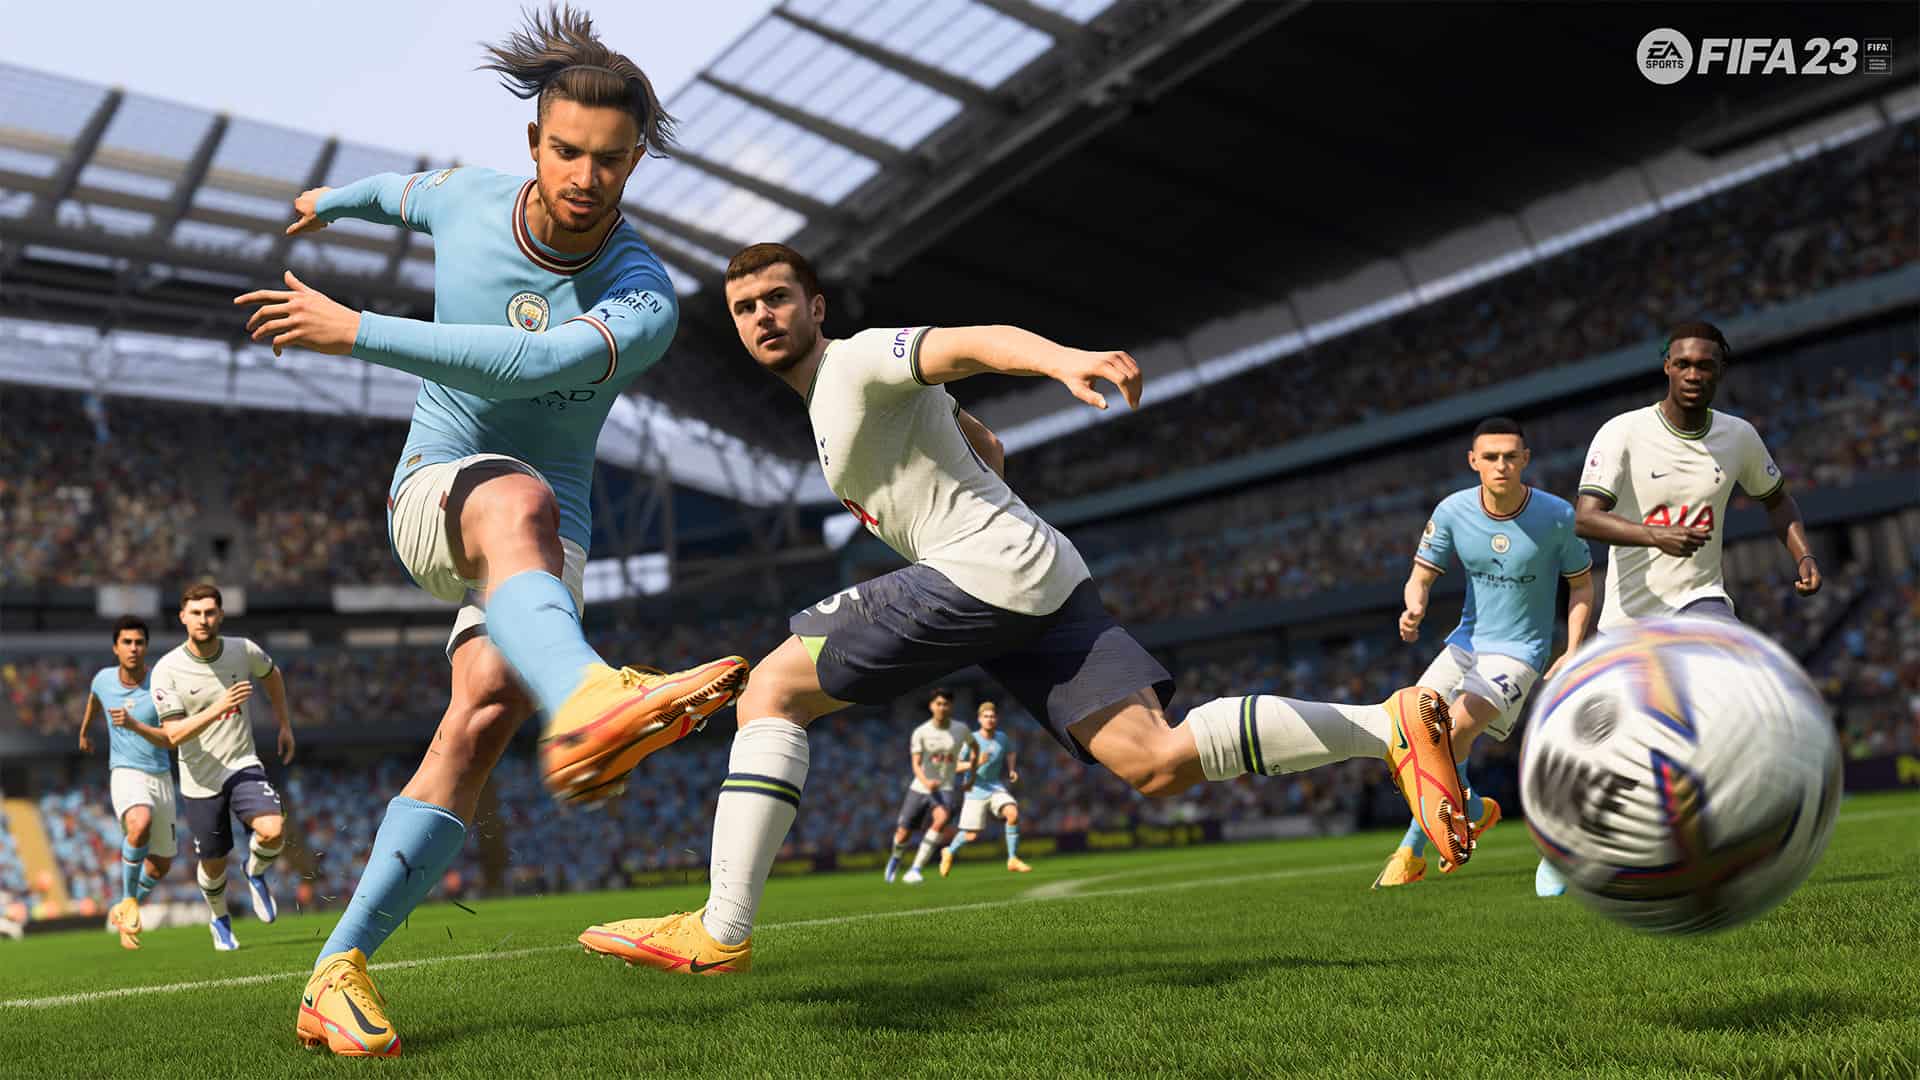 *UPDATED* FIFA 23 Web App and Companion App – release date and expected rewards